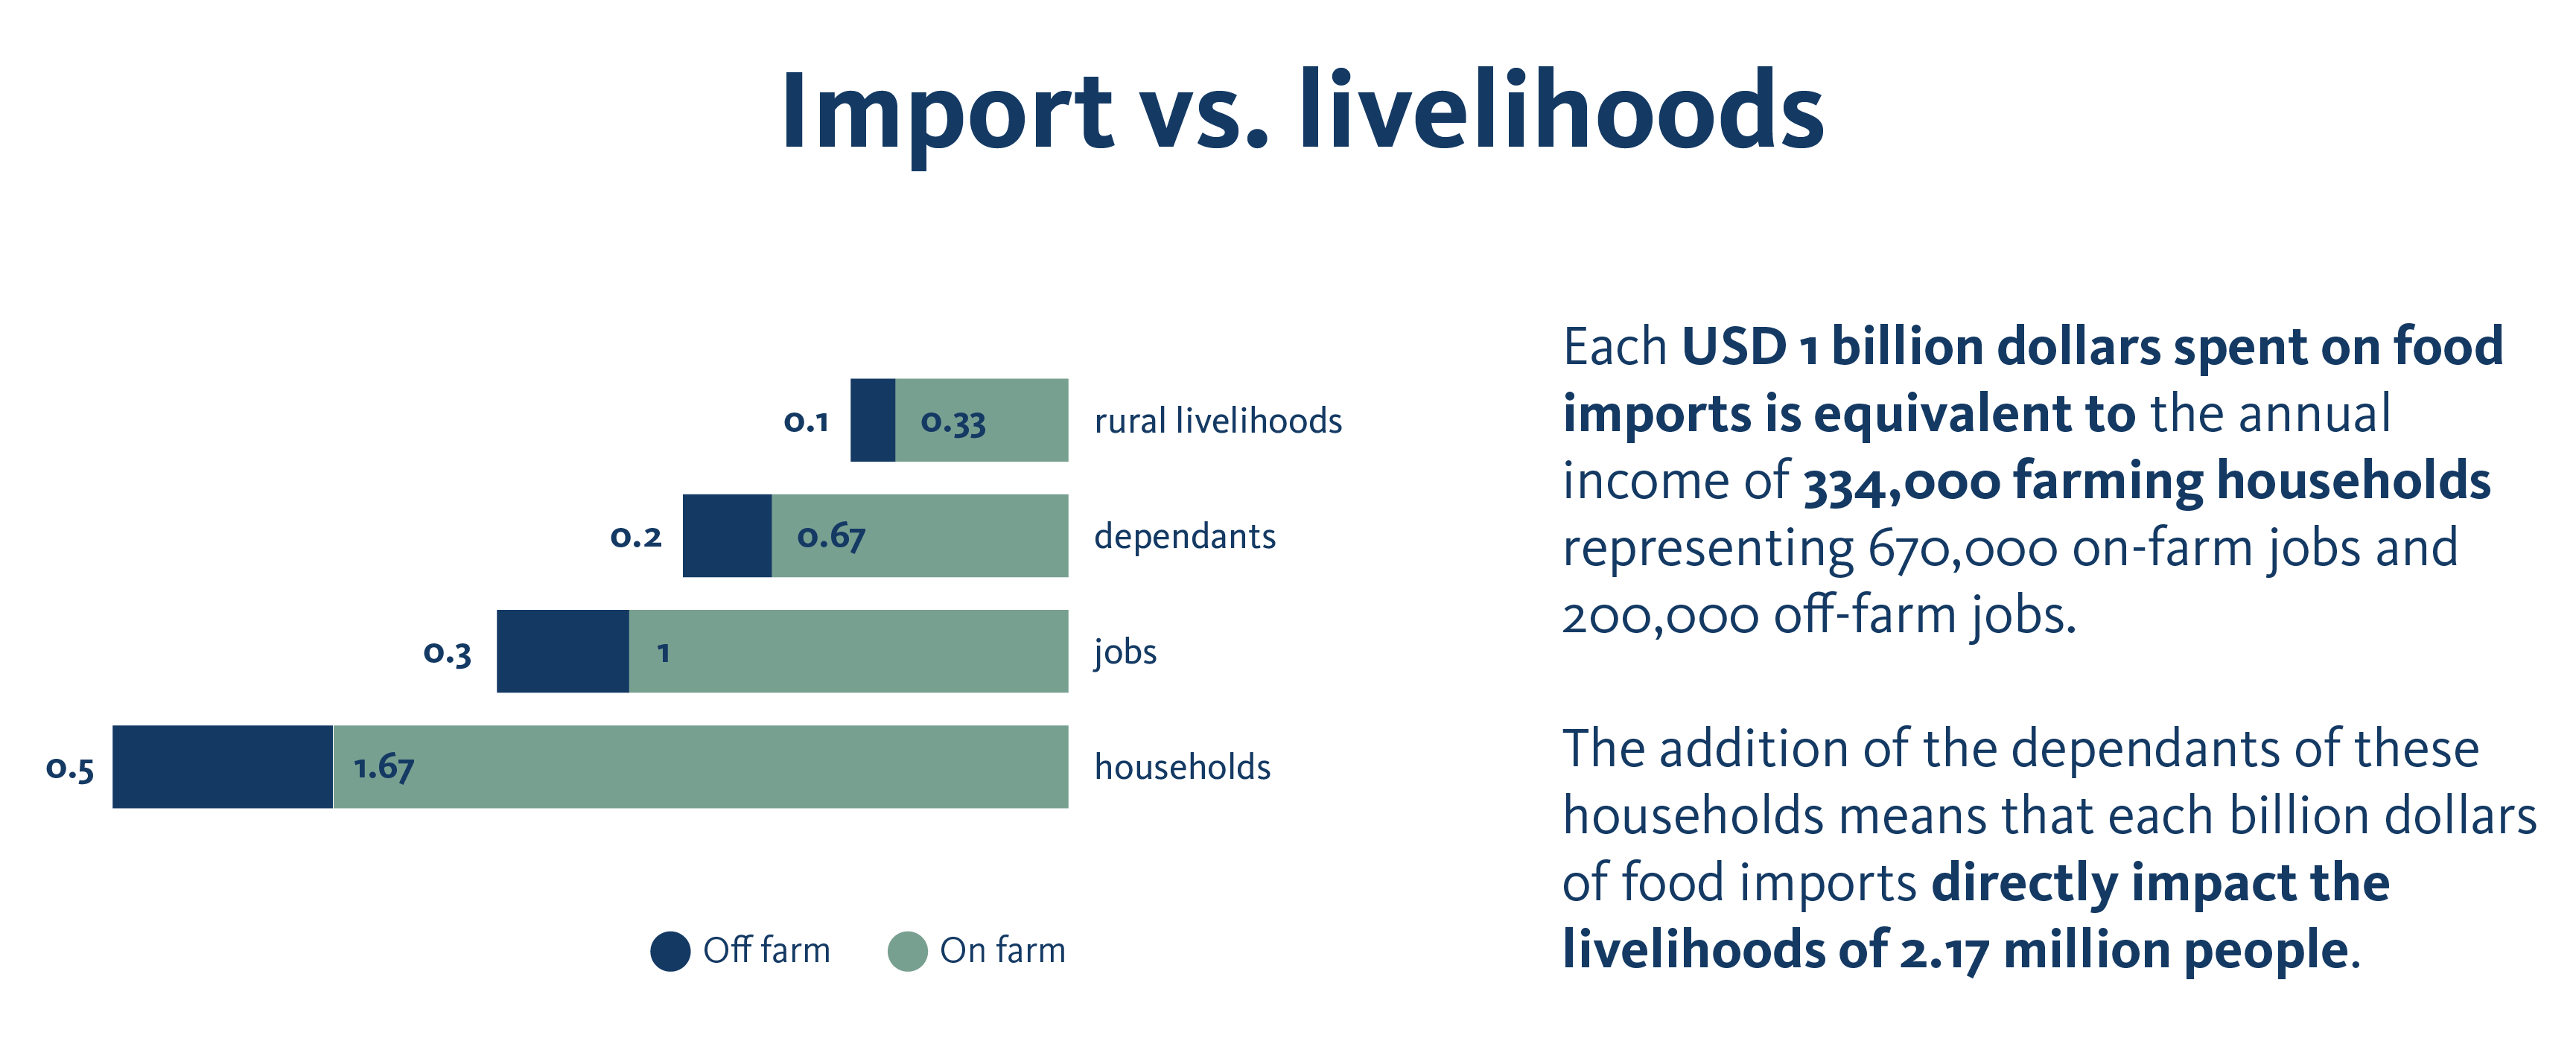 Each USD 1 billion dollars spent on food imports is equivalent to the annual income of 334,000 farming households representing 670,000 on-farm jobs and 200,000 off-farm jobs. The addition of the dependants of these households means that each billion dollars of food imports directly impact the livelihoods of 2.17 million people.